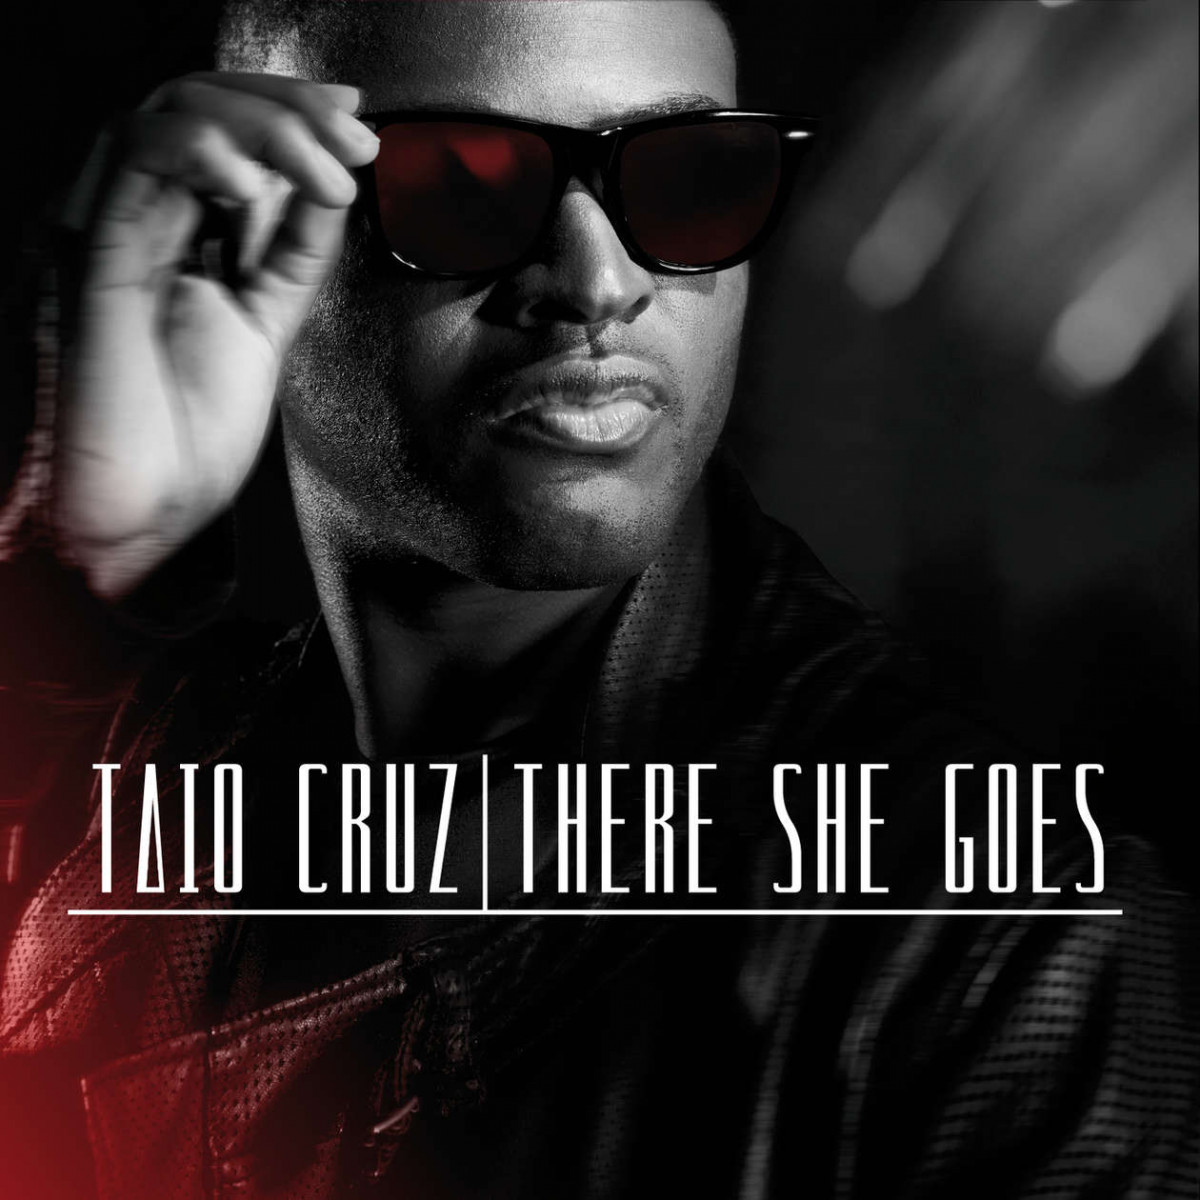 Taio Cruz - There She Goes (2012)